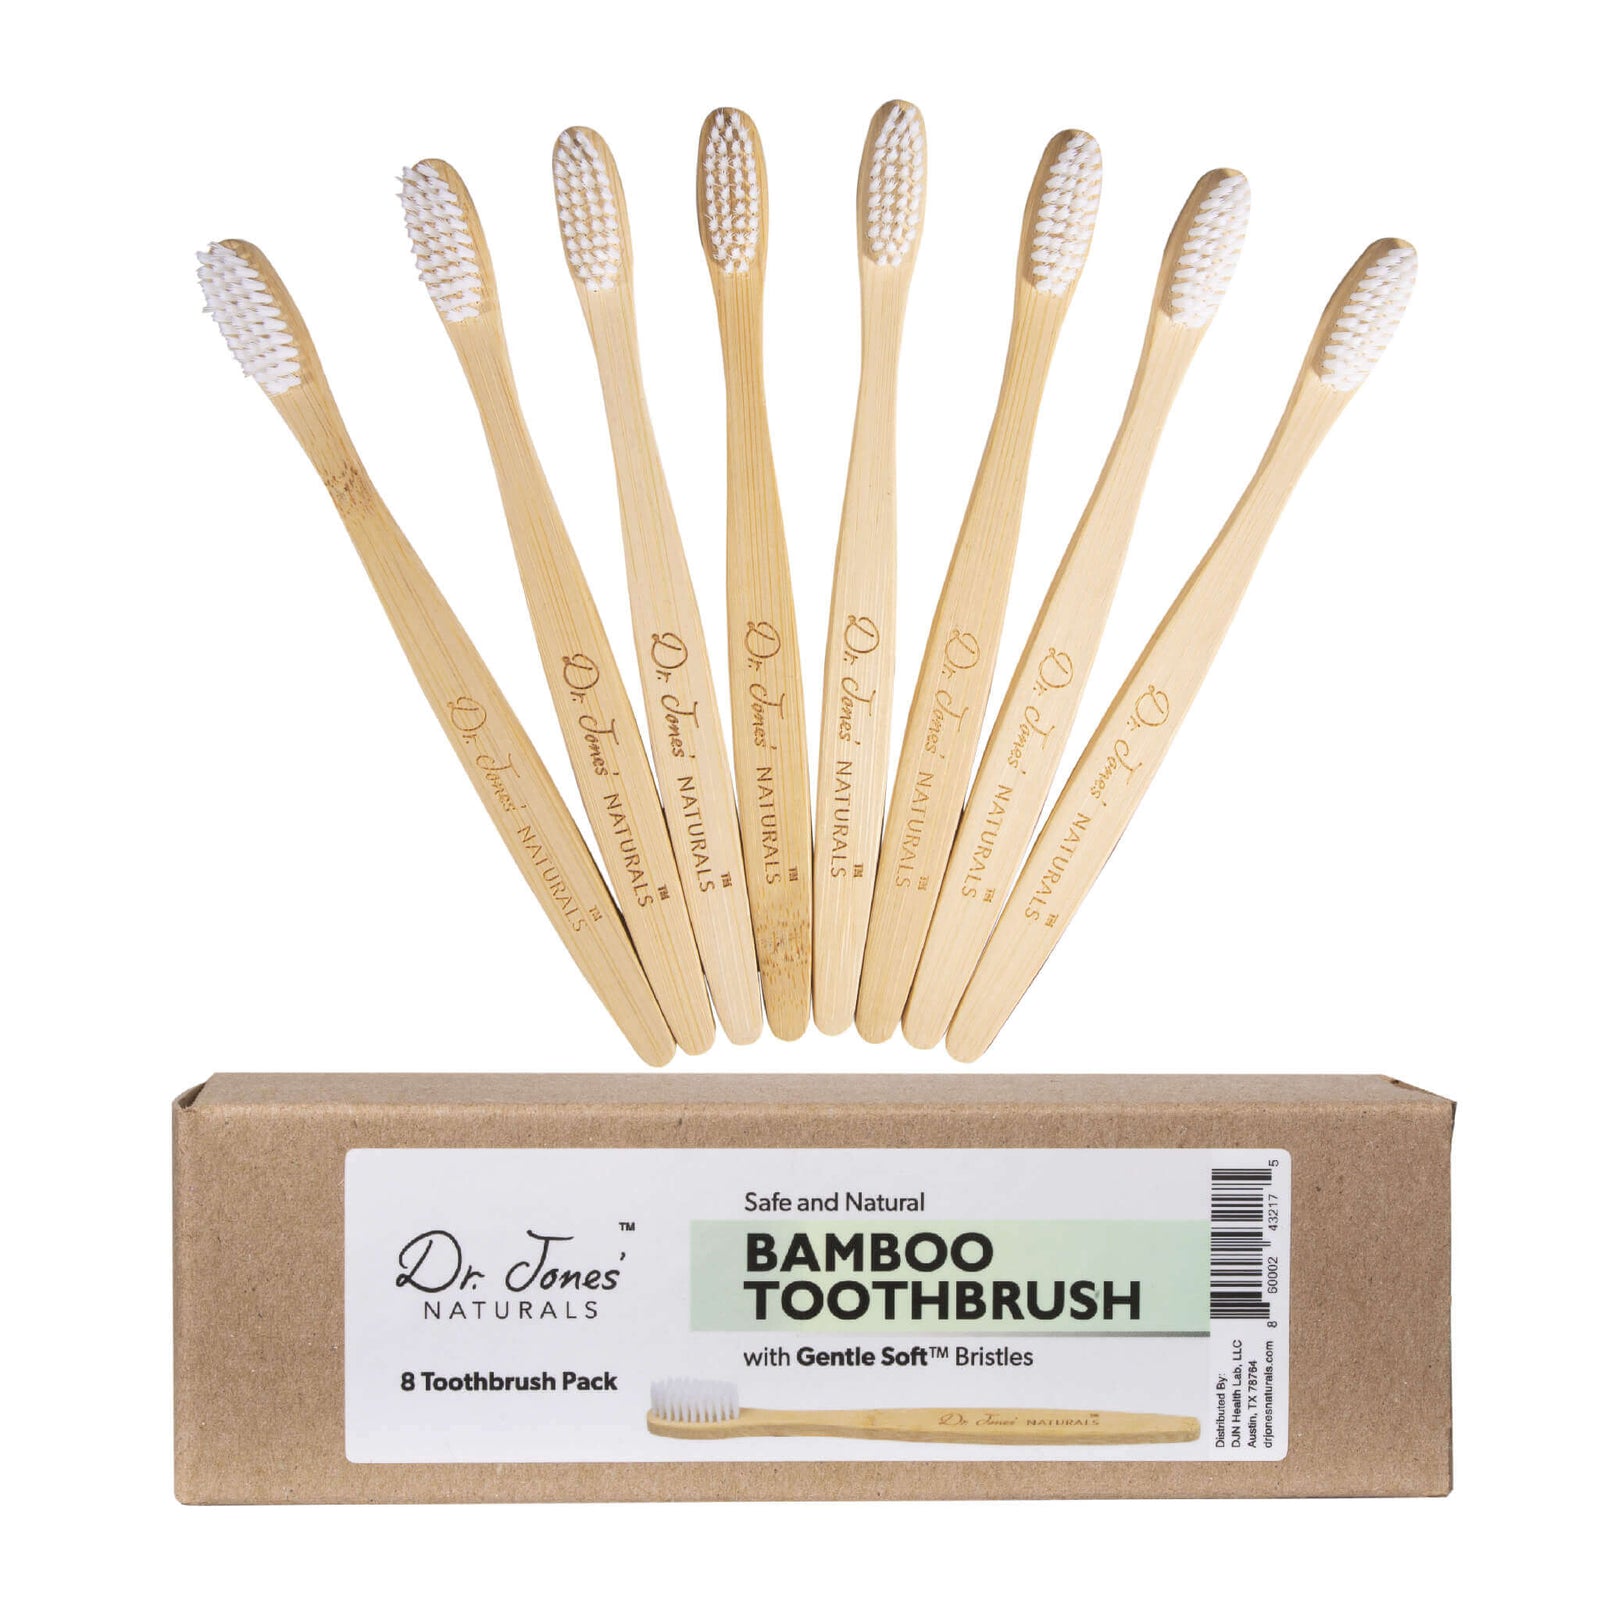 Bamboo Gentle-Soft Toothbrush Pack